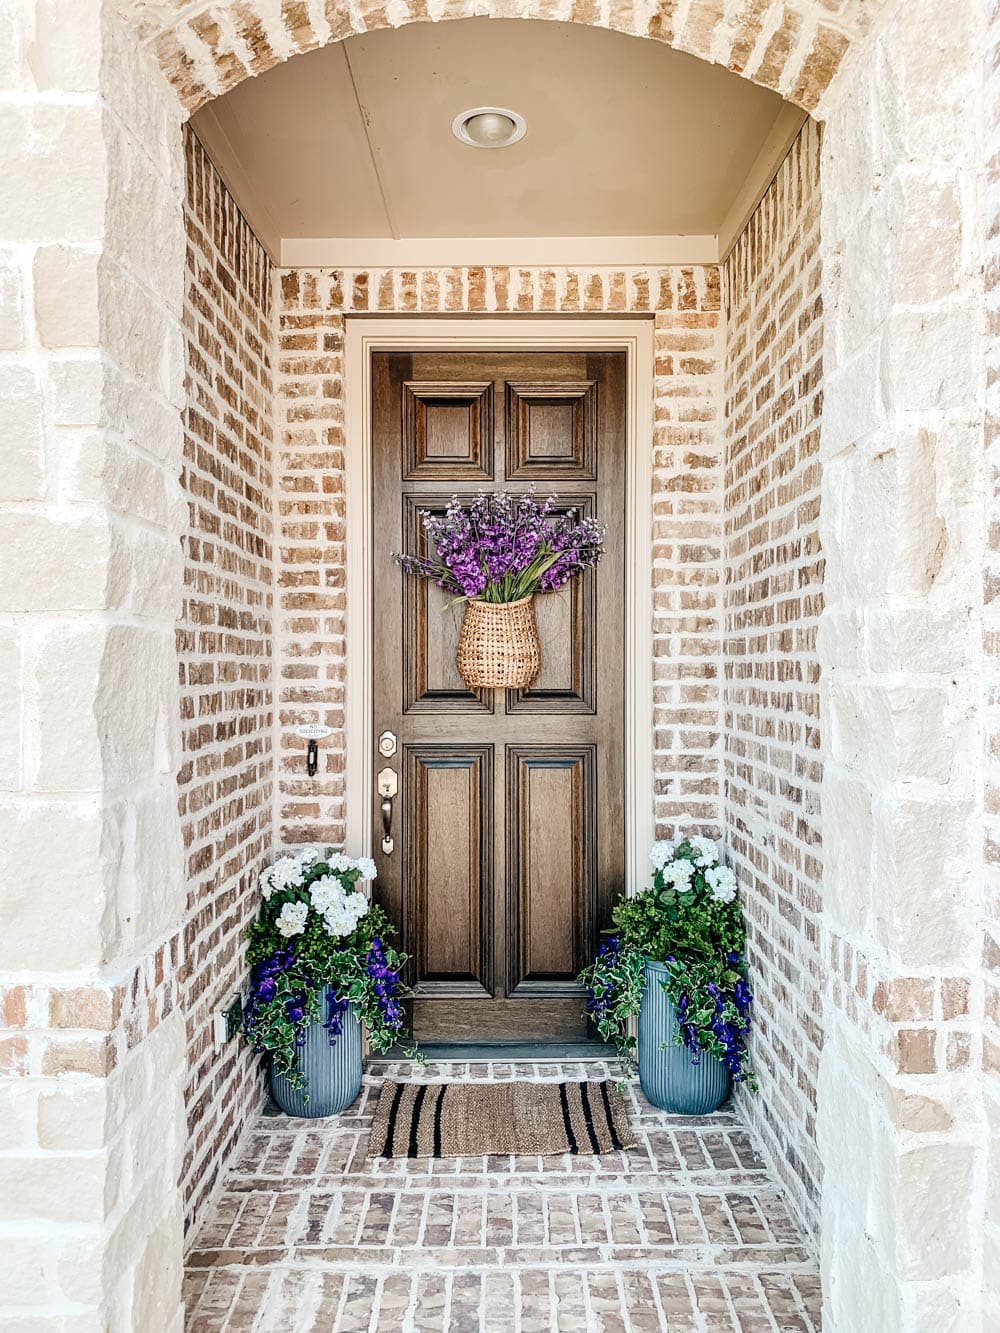 Brighten a porch with low maintenance planters like these filled with artificial flowers and plants. #ABlissfulNest #outdoorplanter #frontporch #planterideas